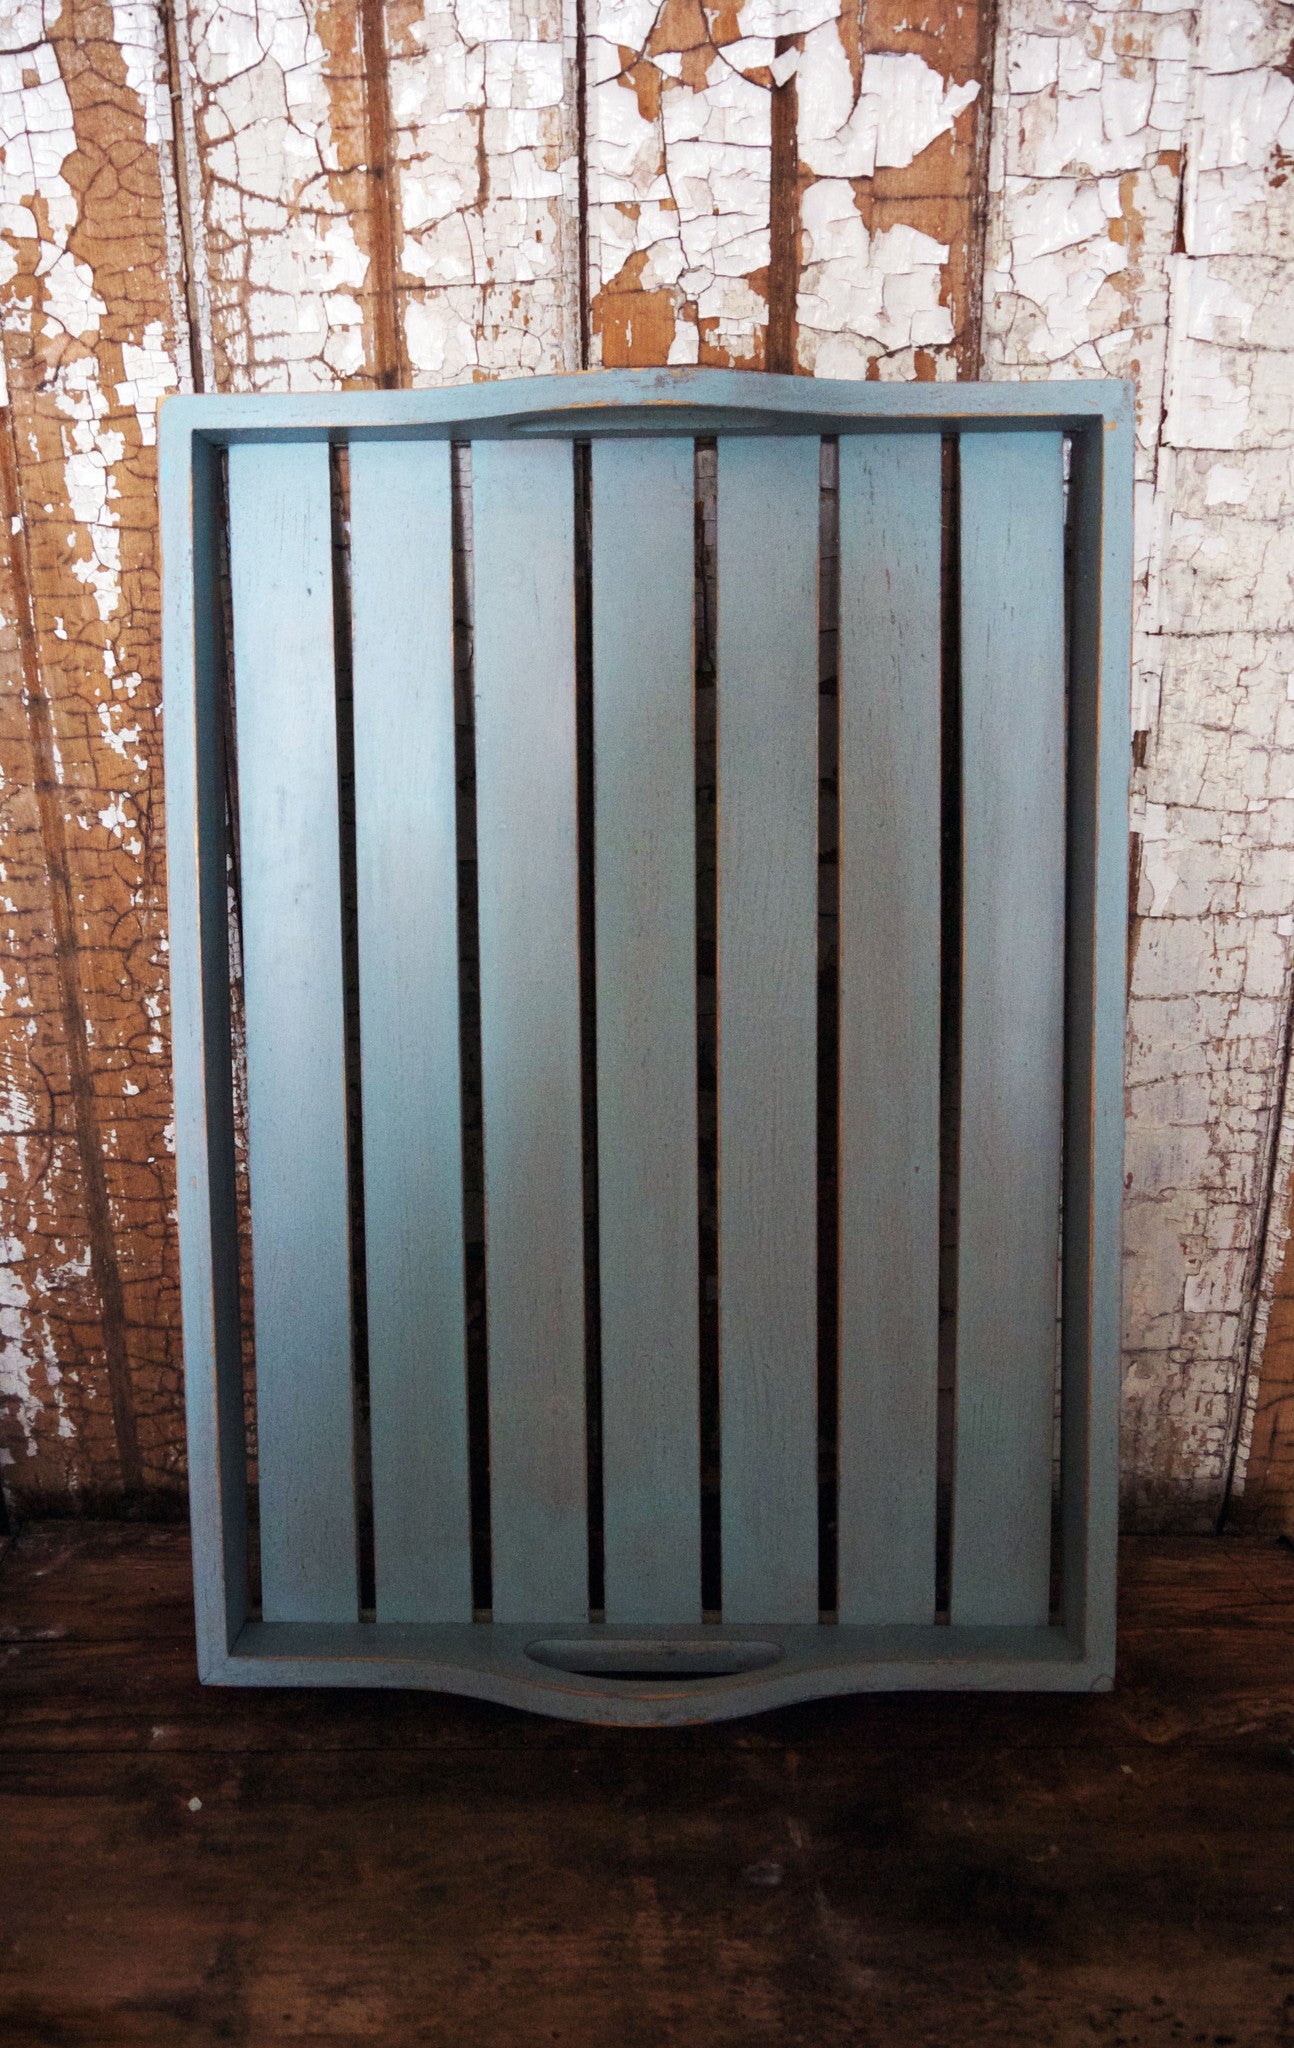 Vintage wooden slatted tray painted in layers of soft grey and blue